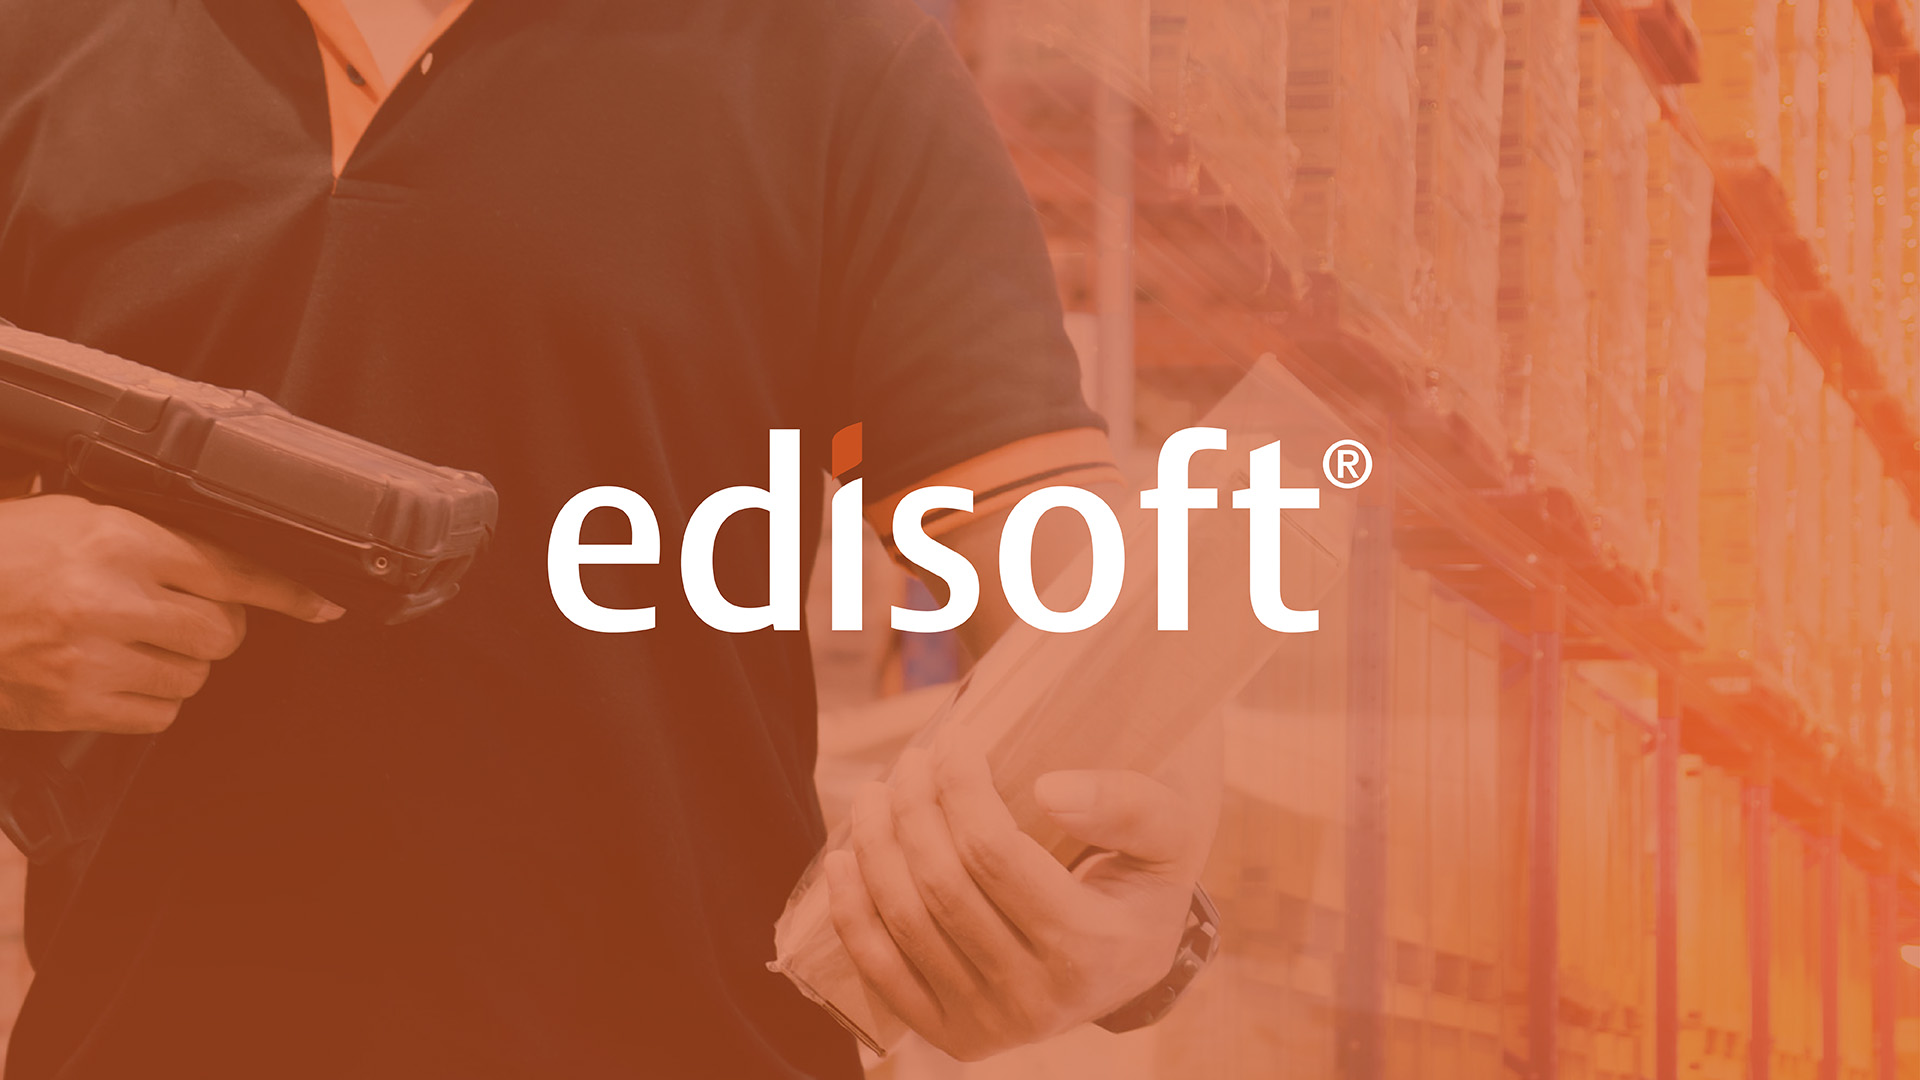 The Edisoft Logo in white with background image of a man scanning a package with a scanner device